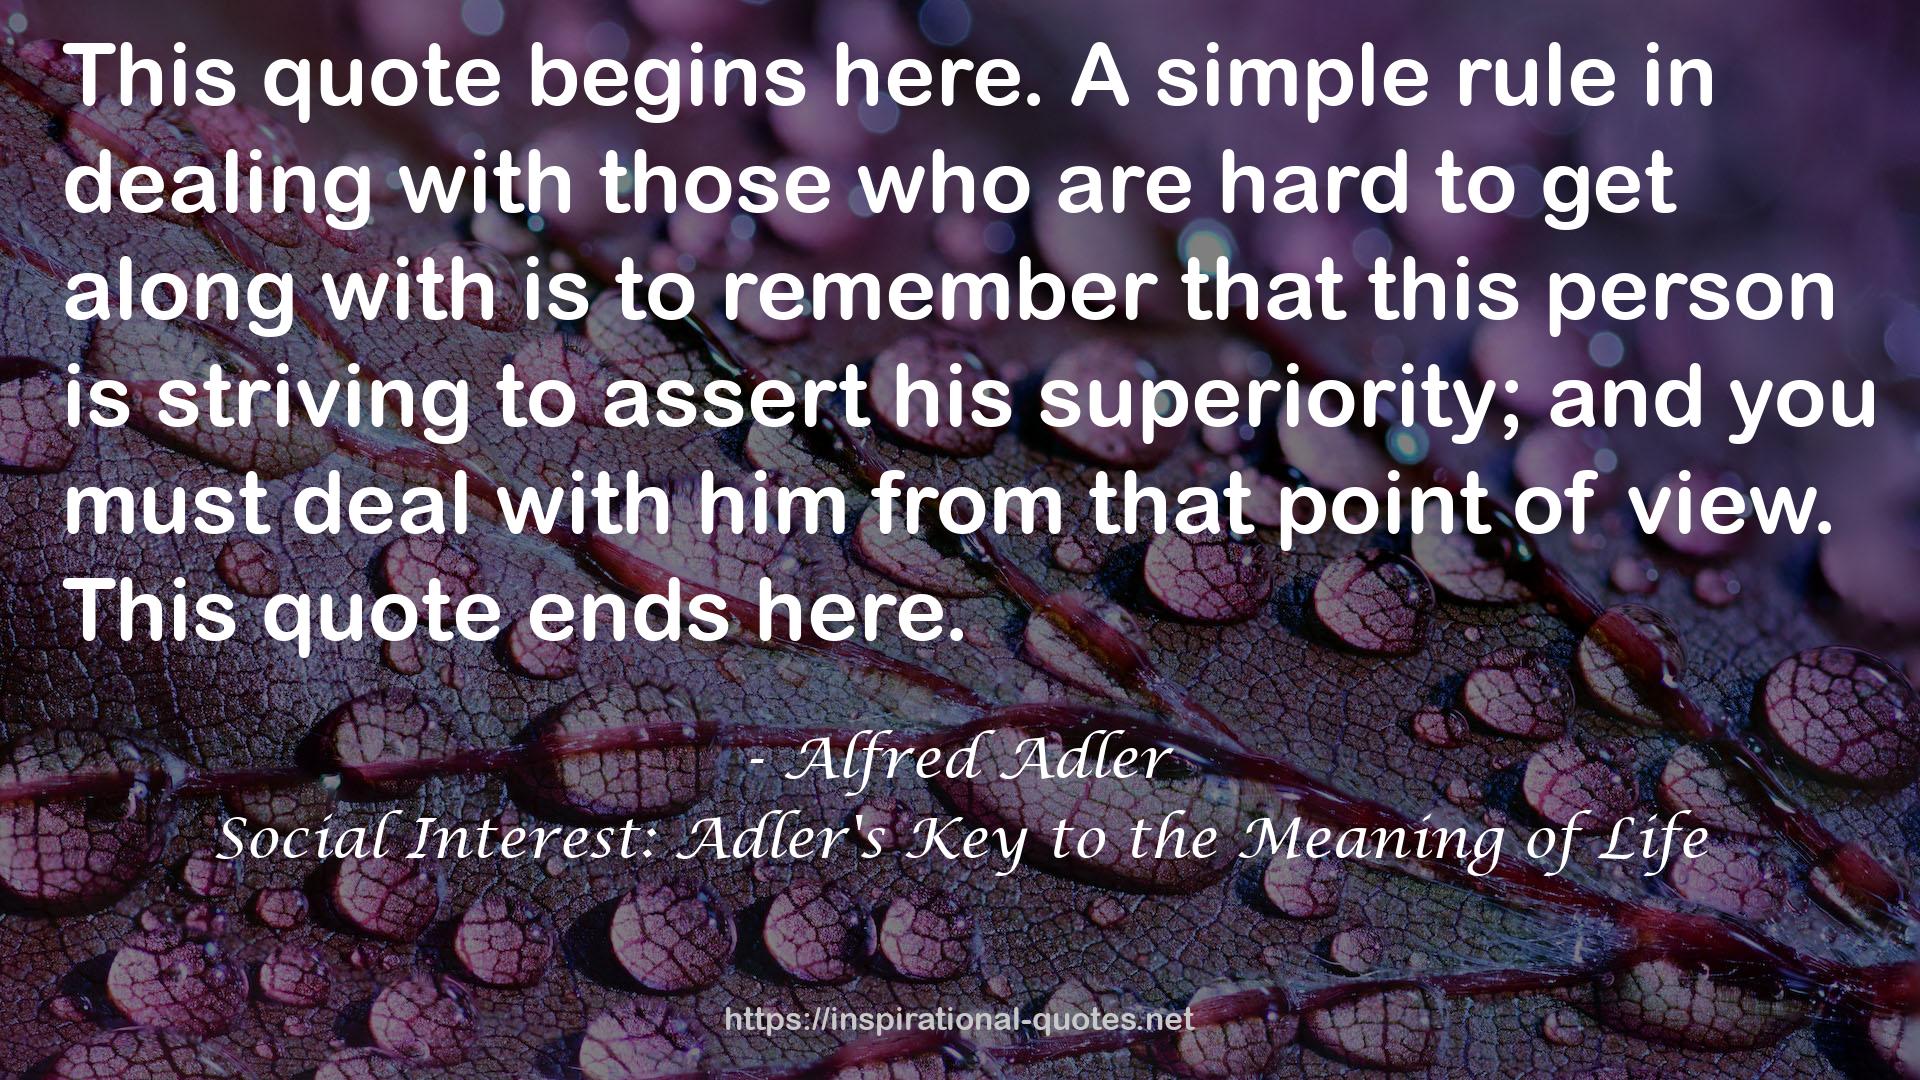 Social Interest: Adler's Key to the Meaning of Life QUOTES